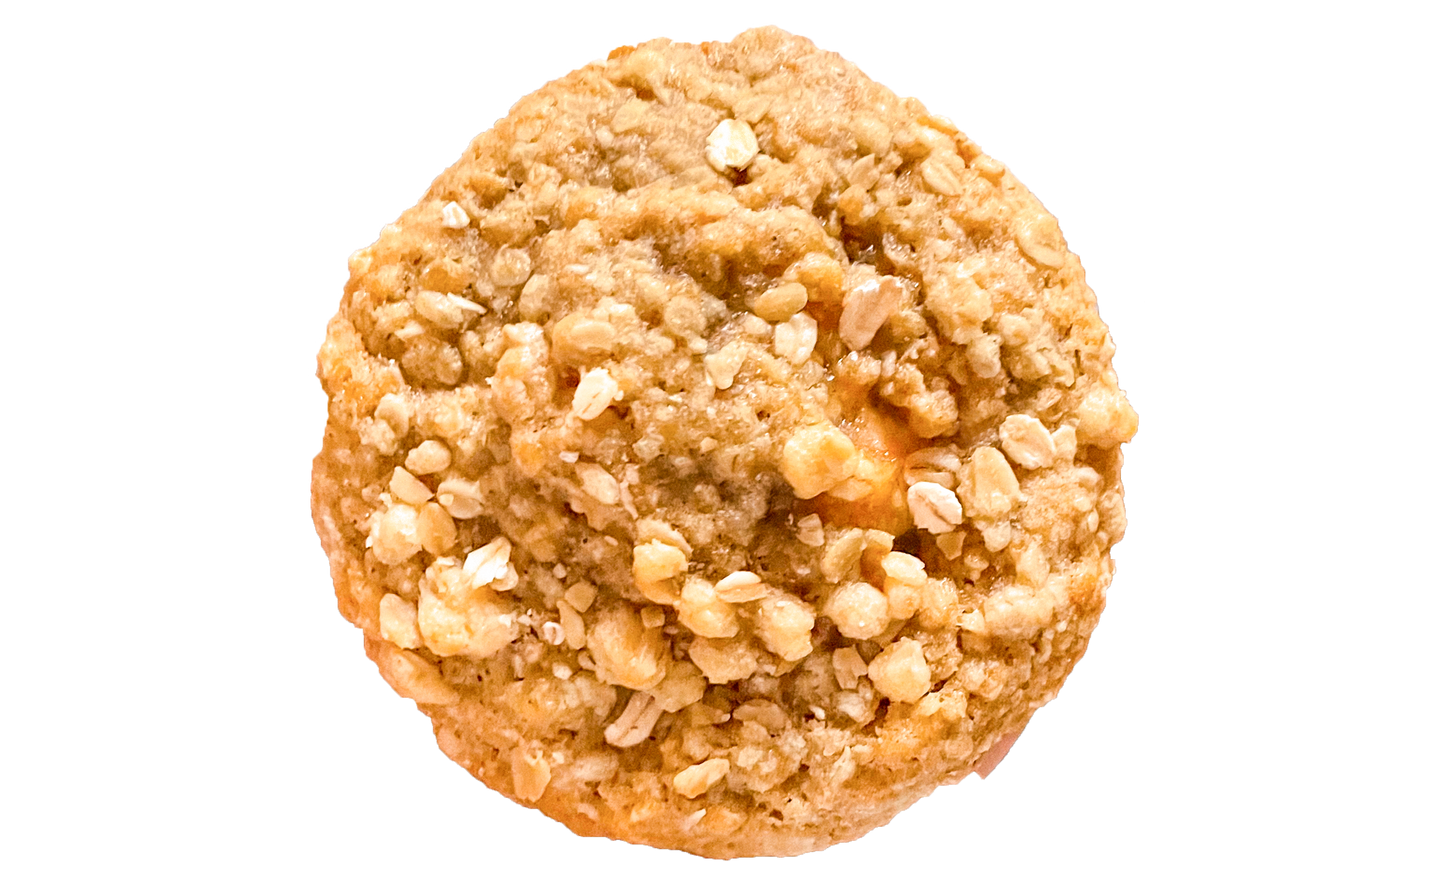 oatmeal cookies filled with spiced apple pie filling